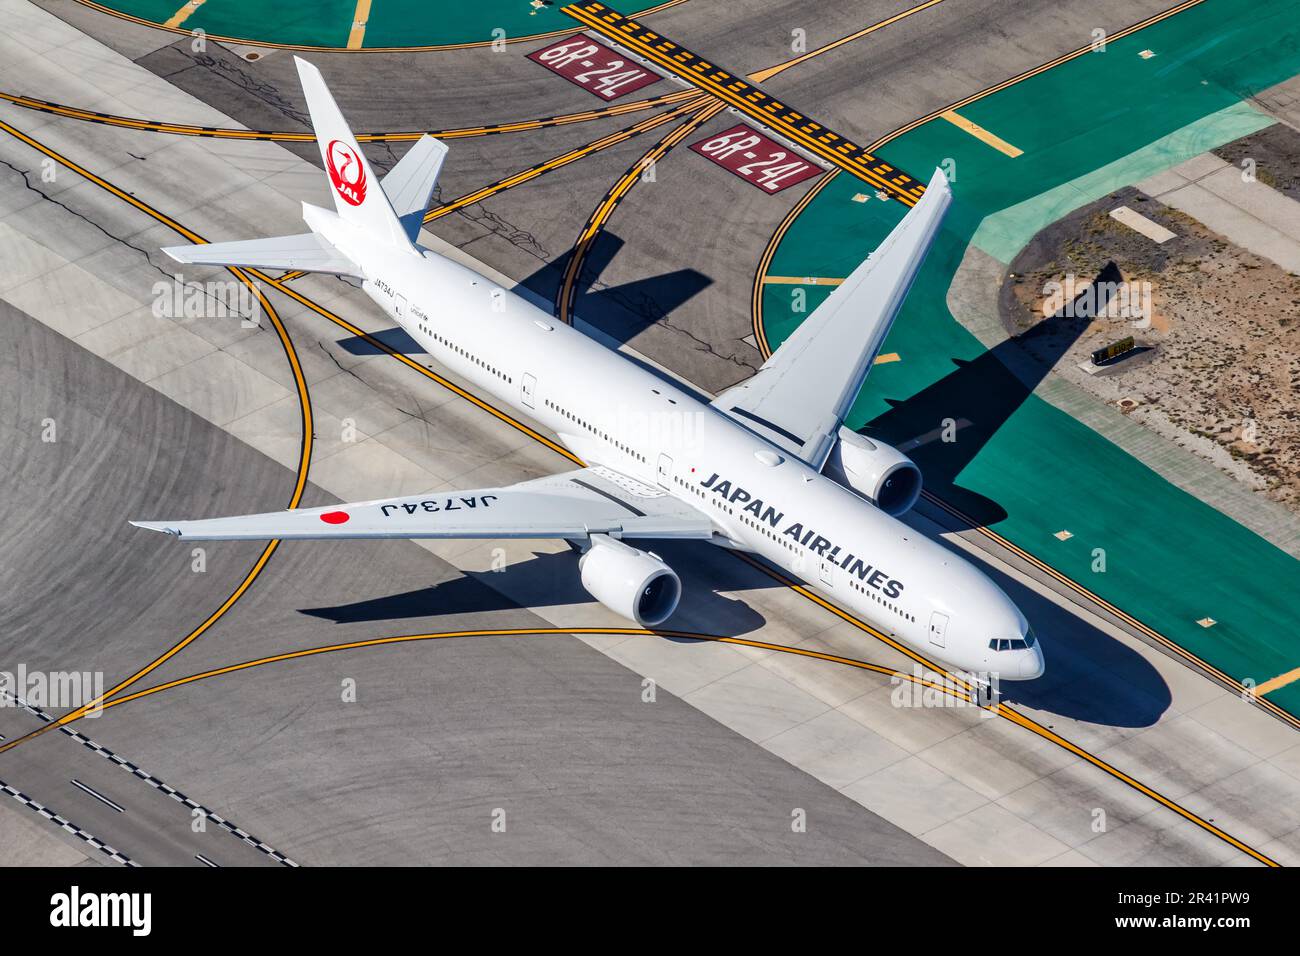 Japan Airlines Boeing 777-300(ER) aircraft Los Angeles airport in 